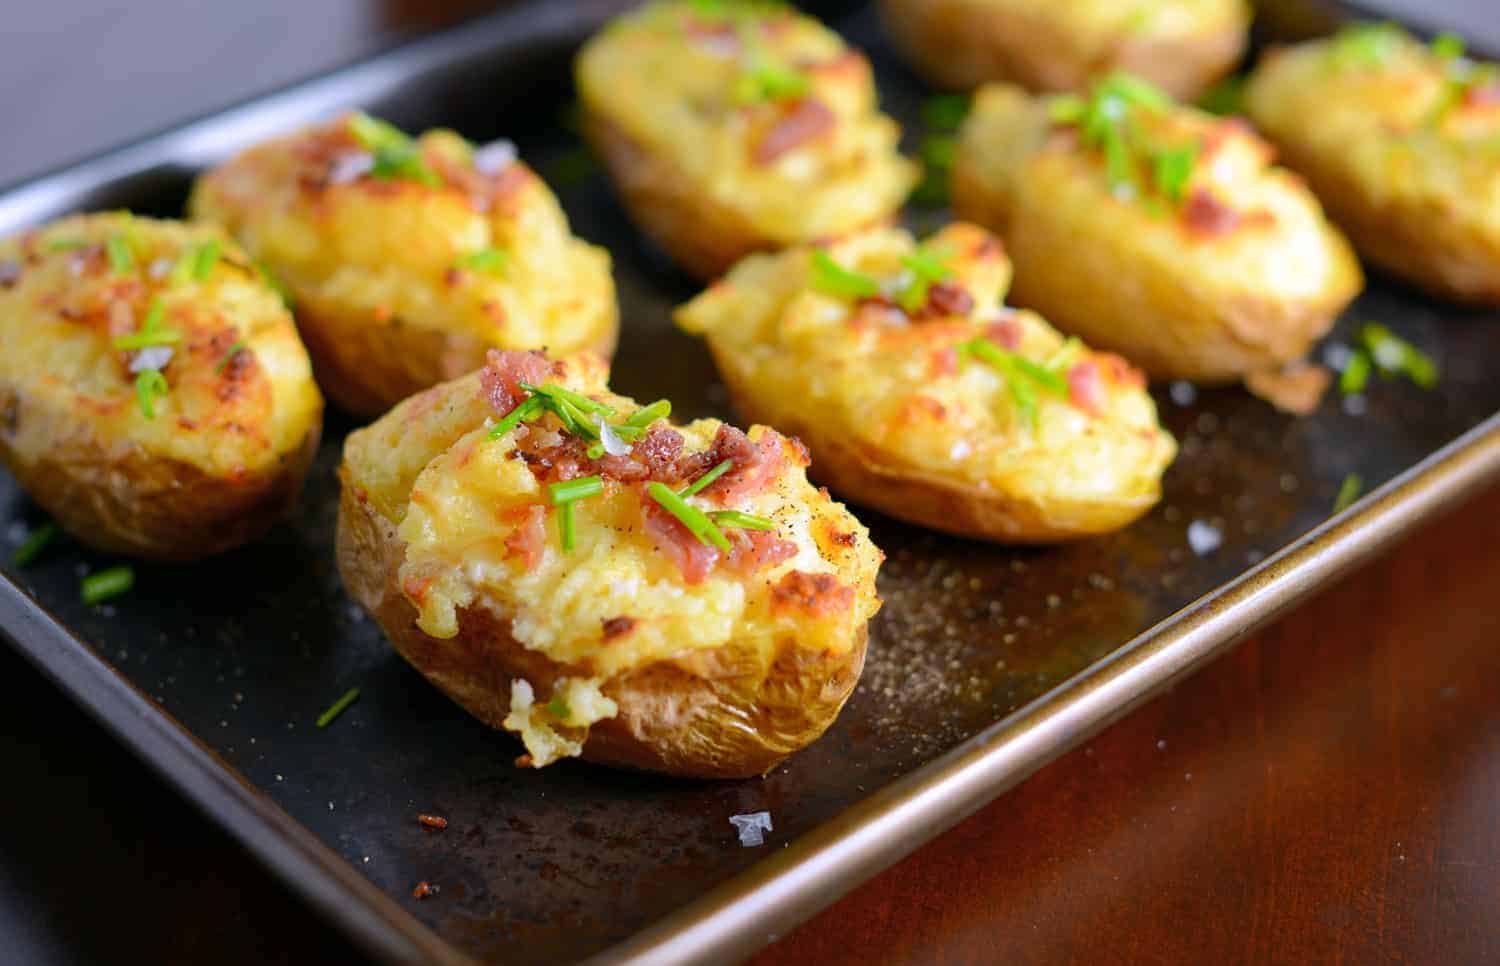 These cheesy twice baked potatoes are the BEST! My whole family gobbles them up, so I make double. The secret ingredient really makes these POP and stand out from the rest.